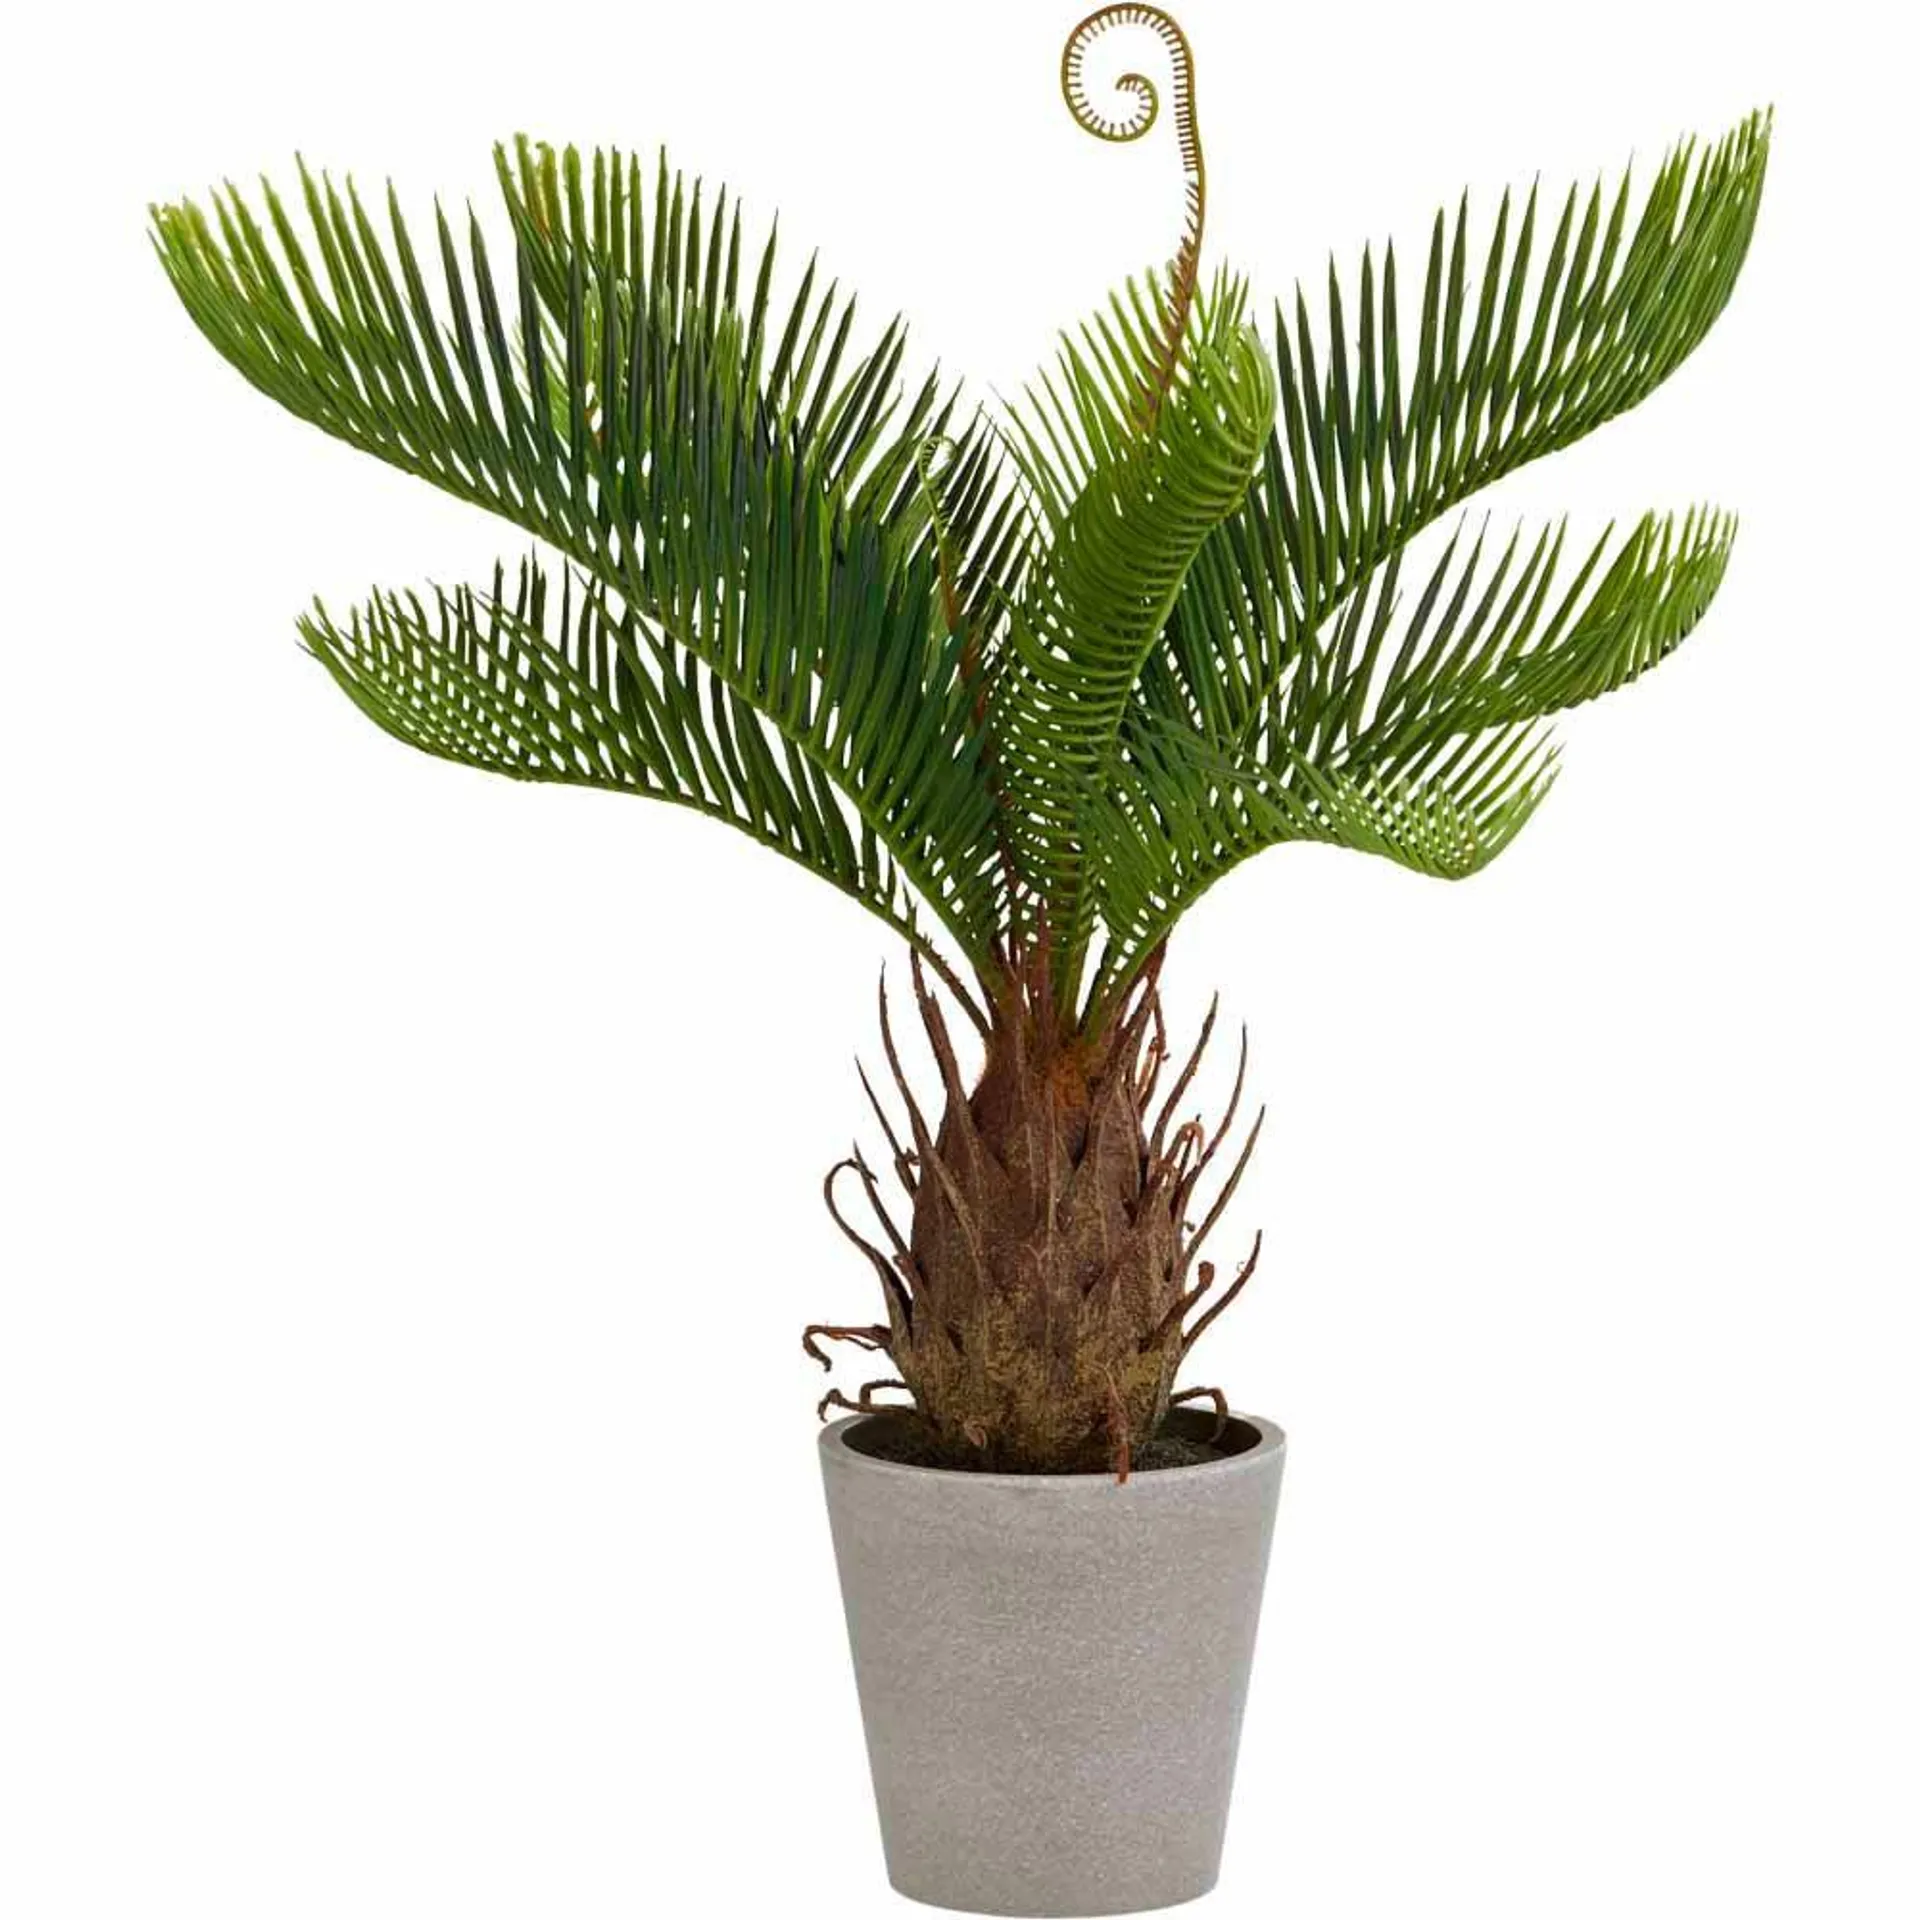 Wilko Tropical Bread Palm Potted Plant